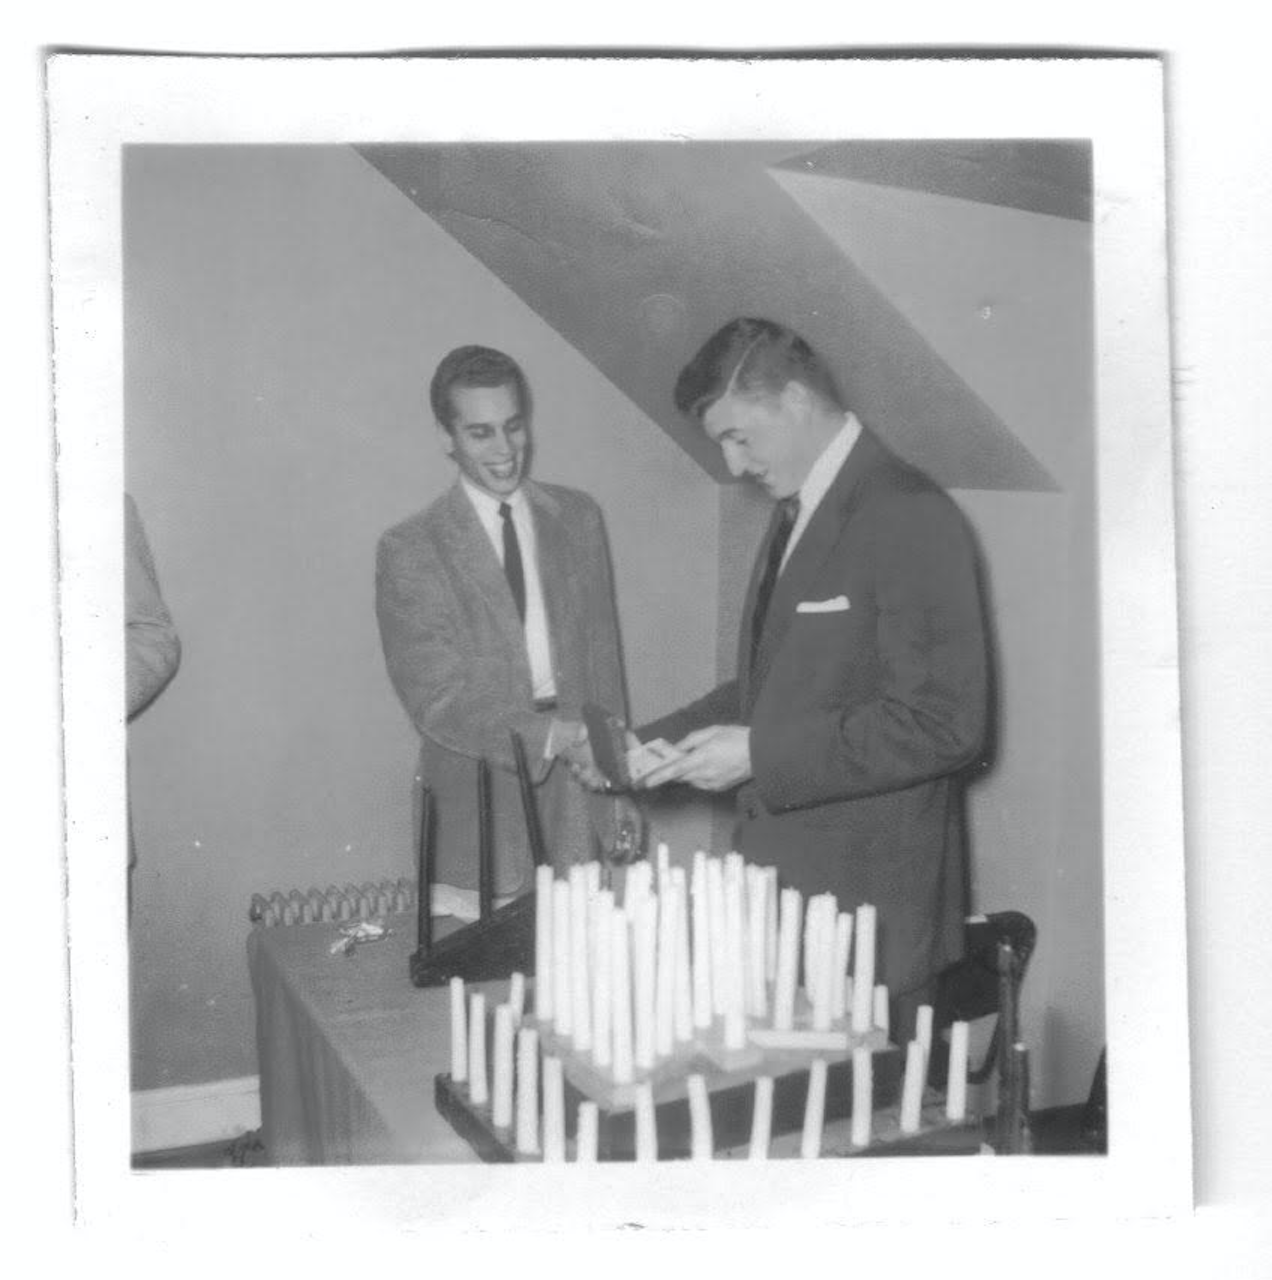  President Dale Wheatly presiding over initiation ceremony in 1953 